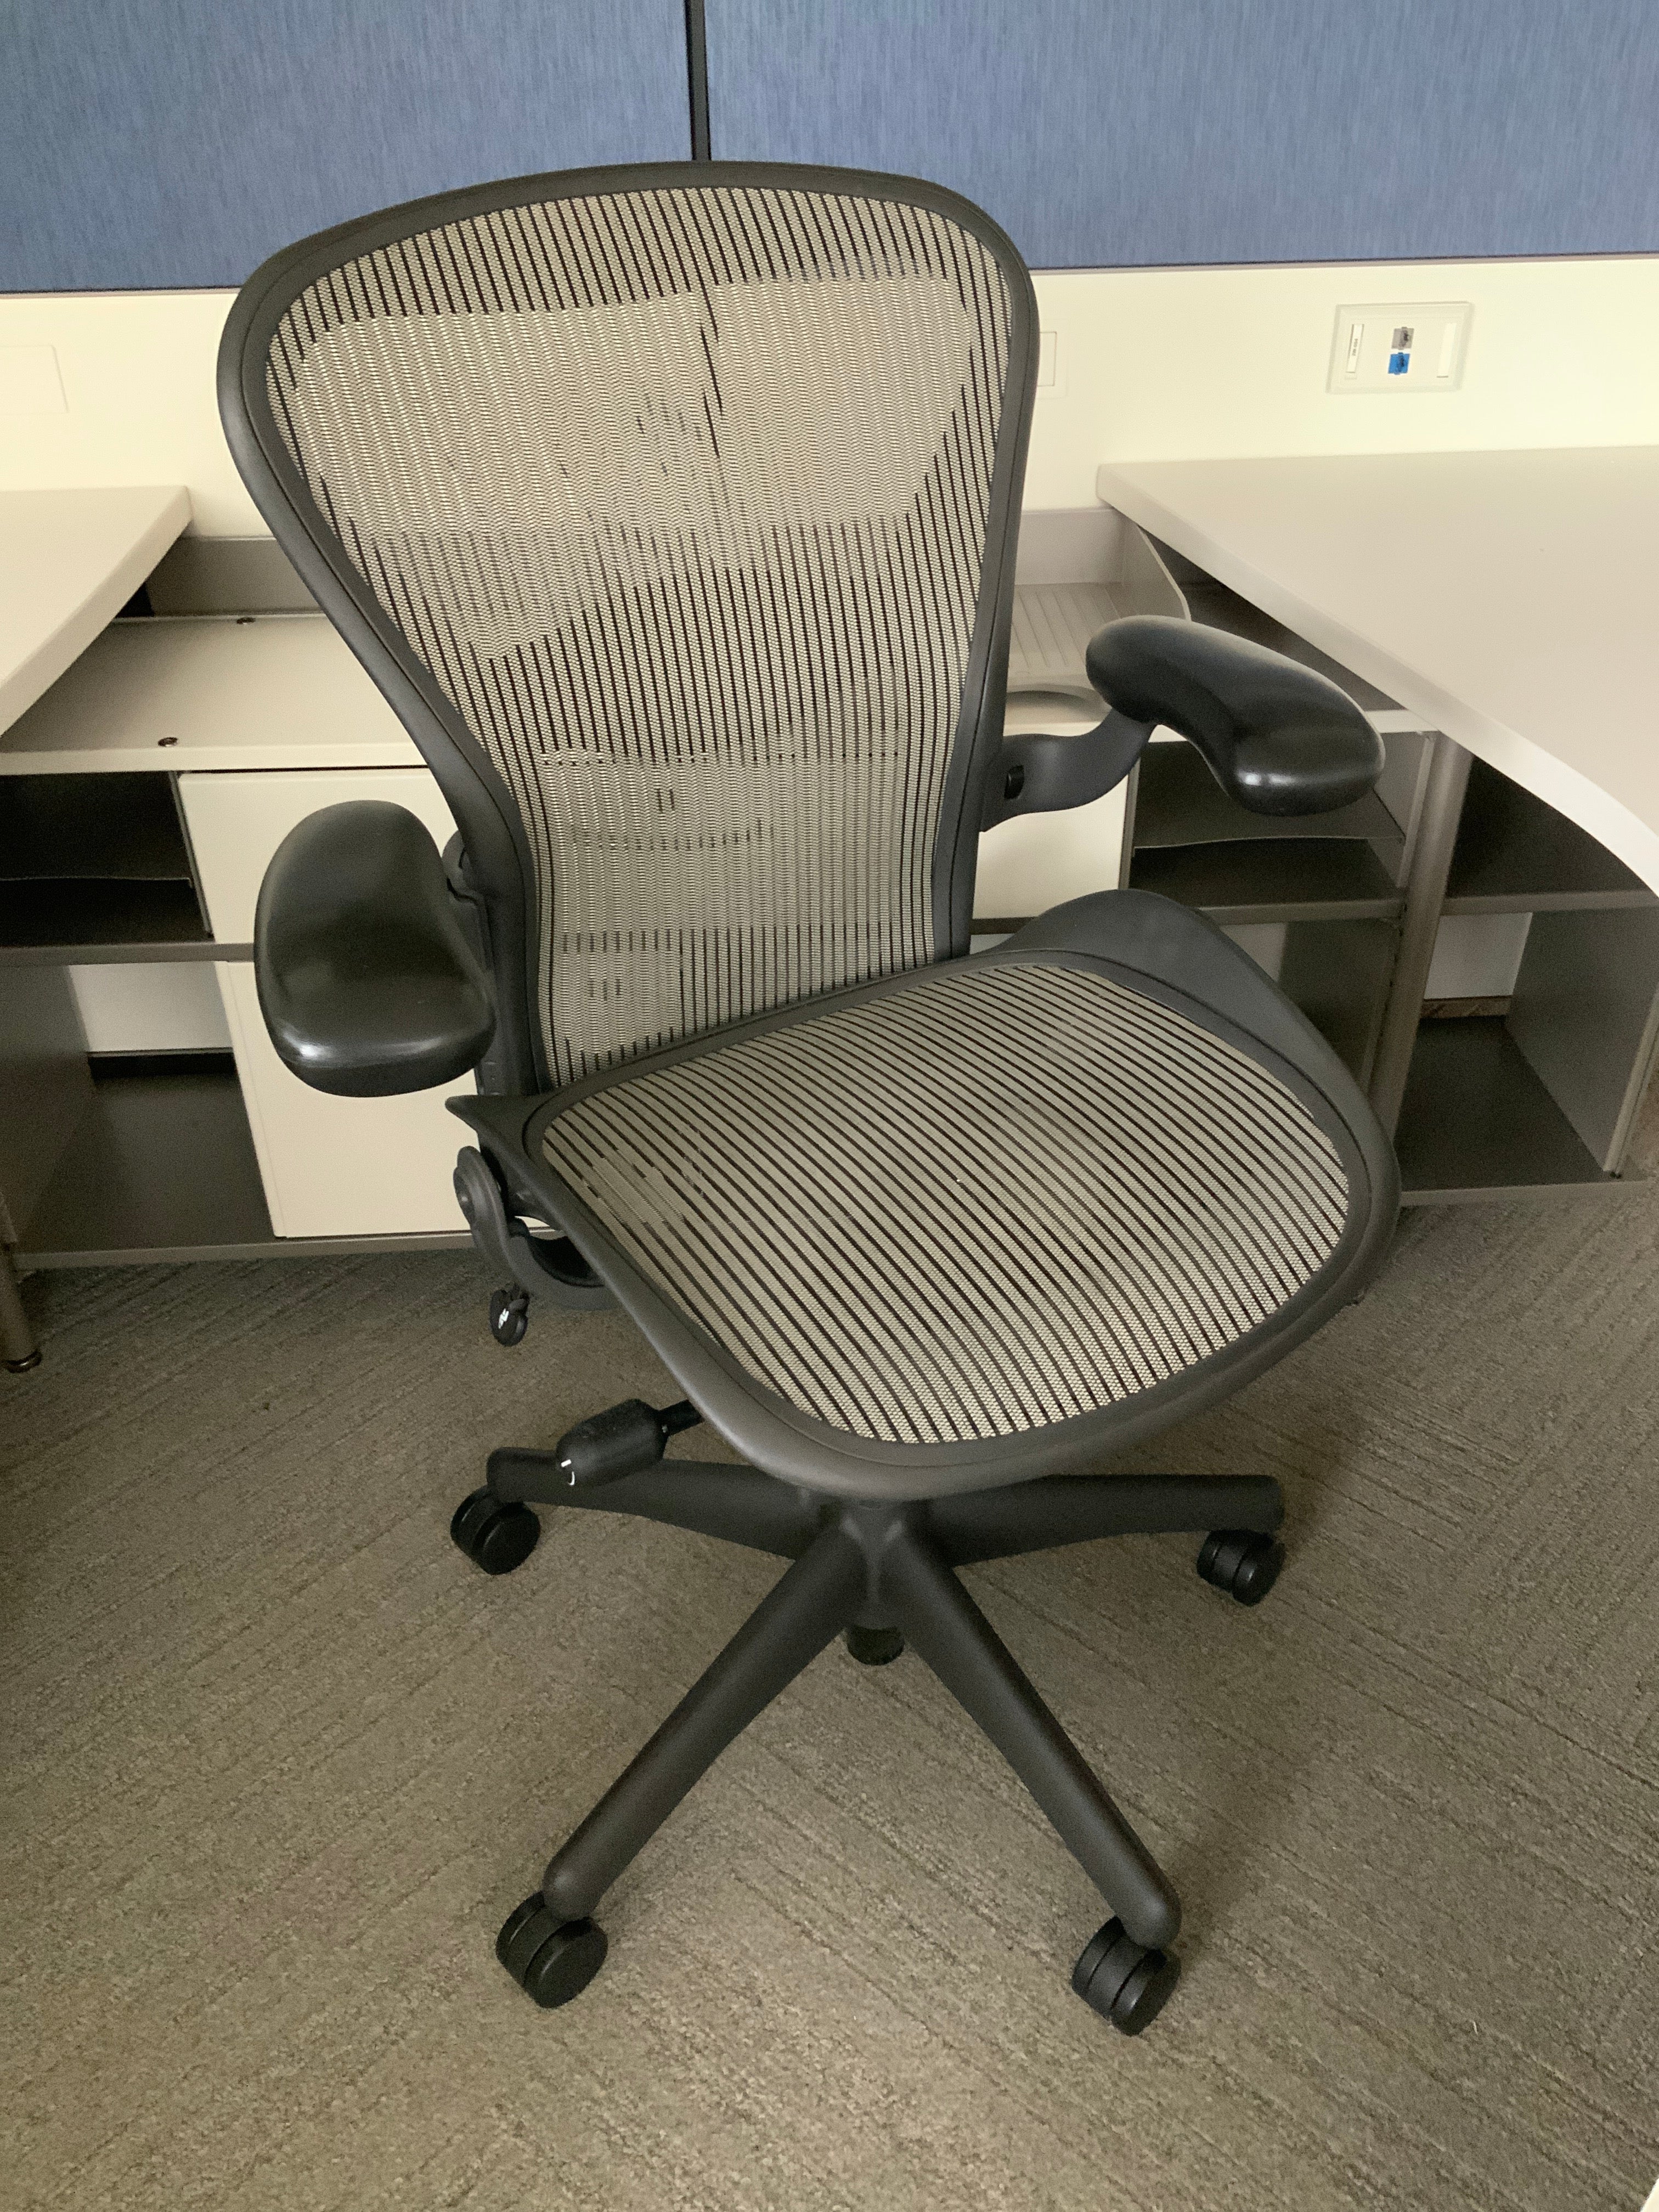 Herman Miller Grey Aeron Task Chair Size B - Preowned - FOB Vernon Hills, IL (Min Purchase Qty = 20)